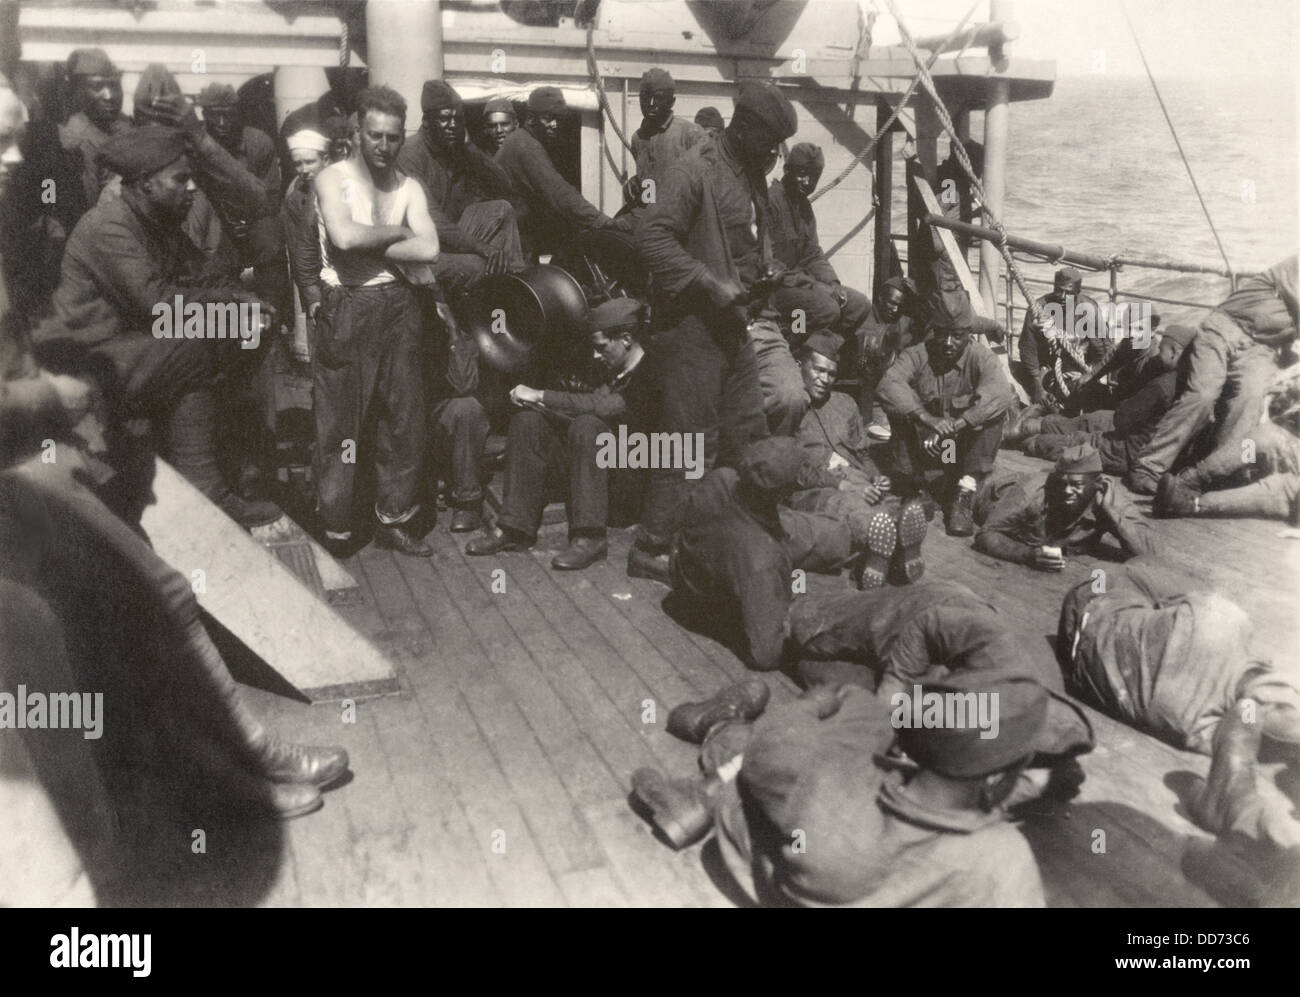 African American soldiers and white sailors on WW1 troop ship. July 18, 1919. The 803rd Pioneer Infantry Battalion gathered on Stock Photo